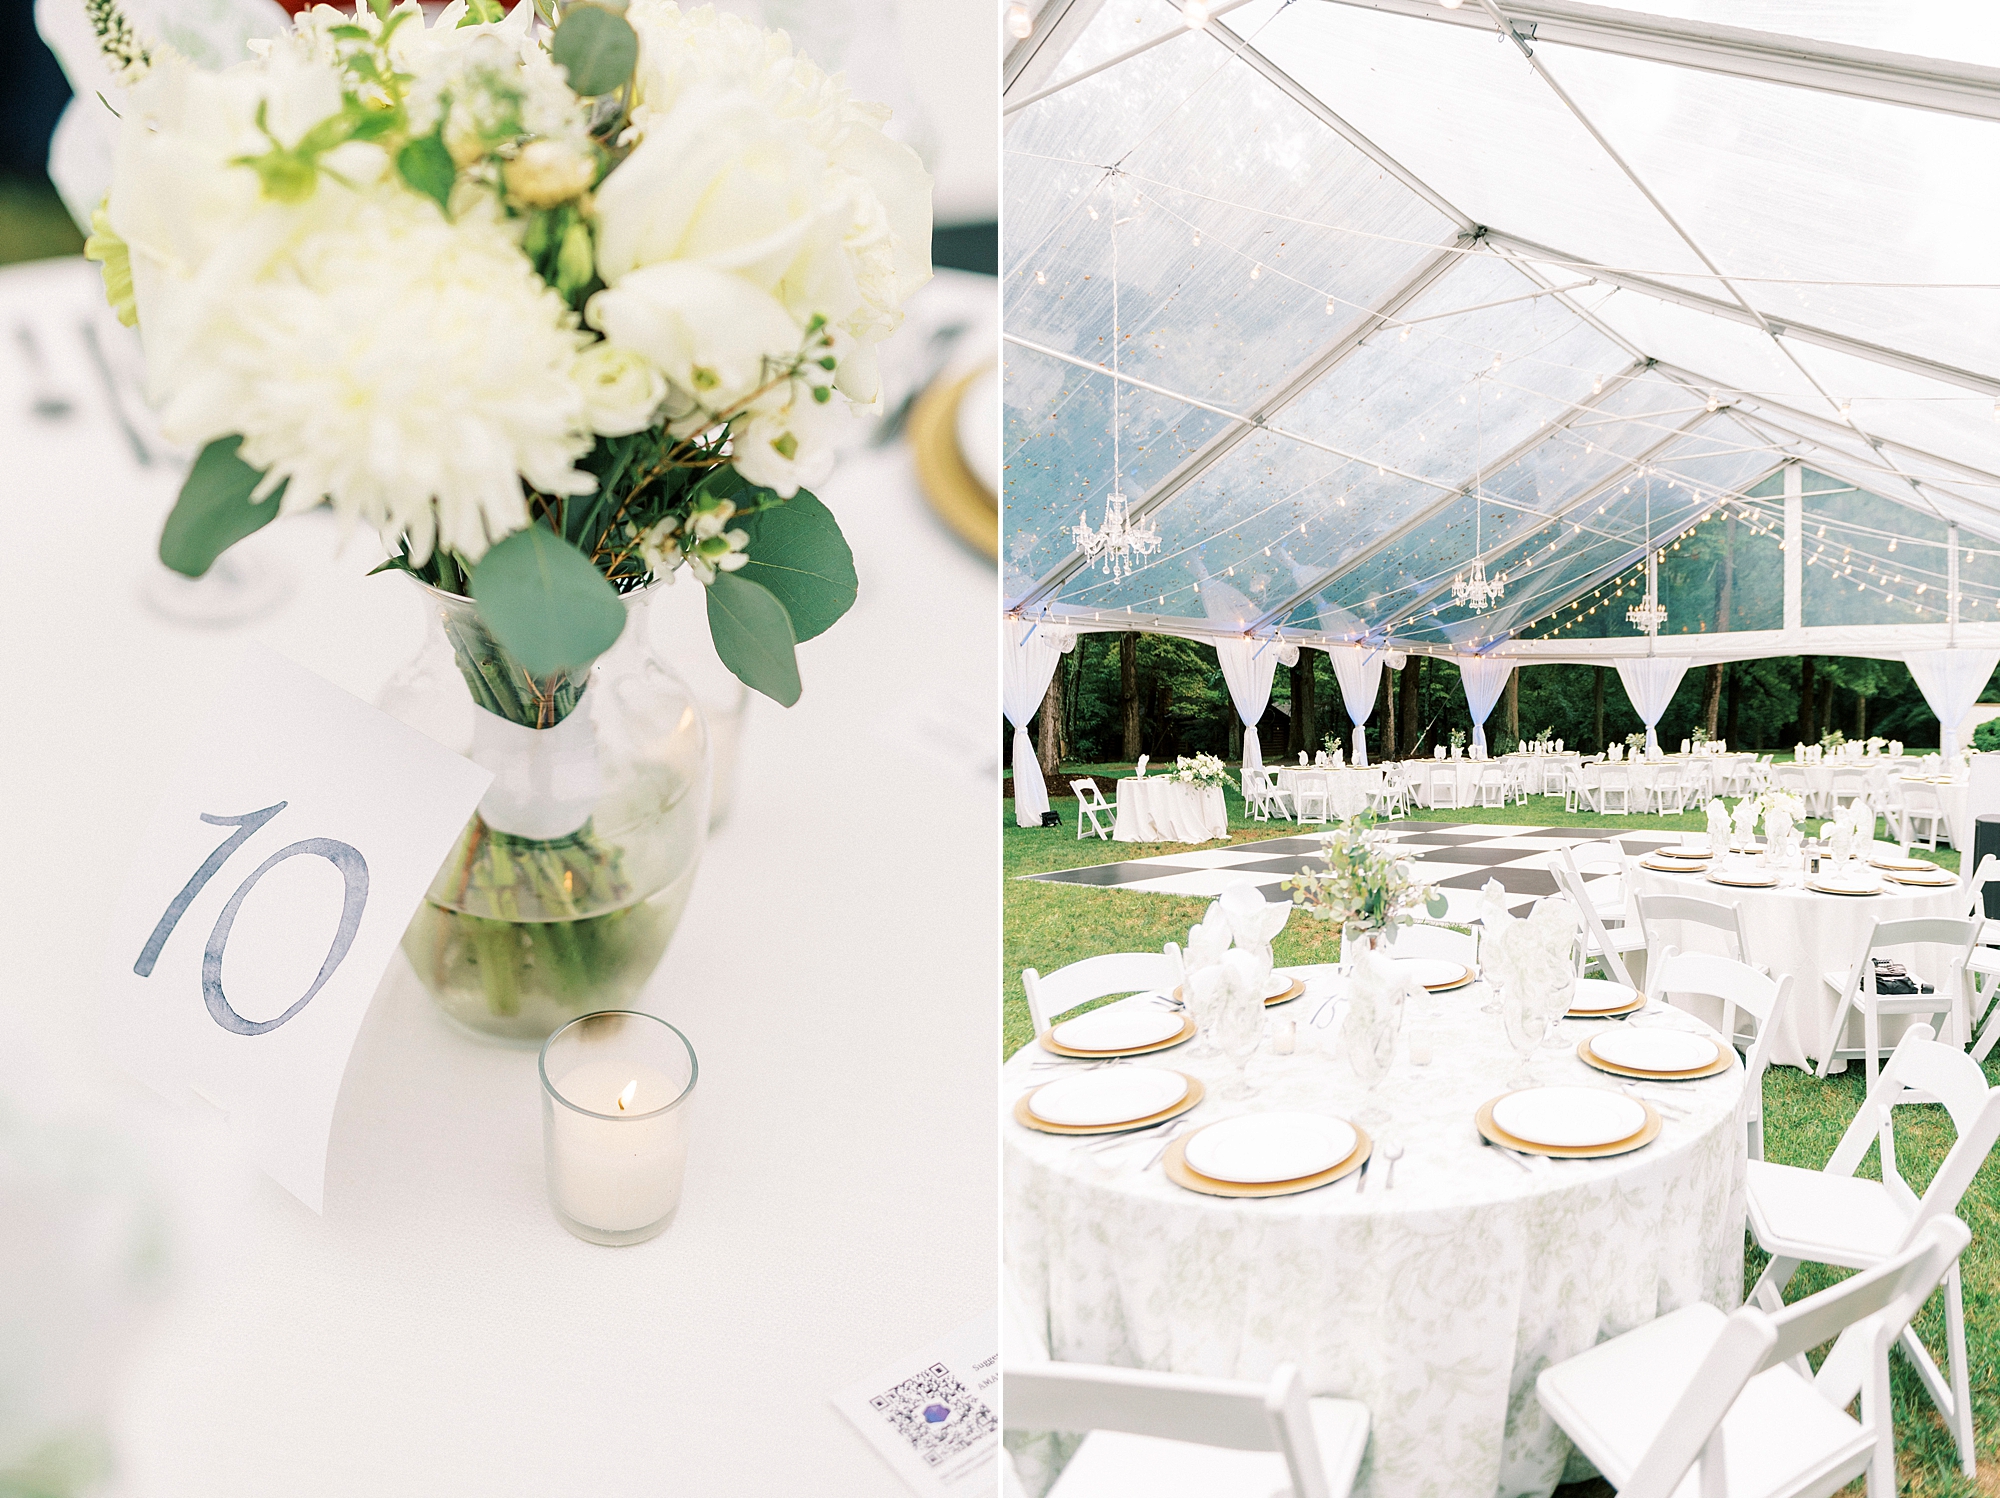 tented wedding reception with ivory and gold details at Boxwood Estate